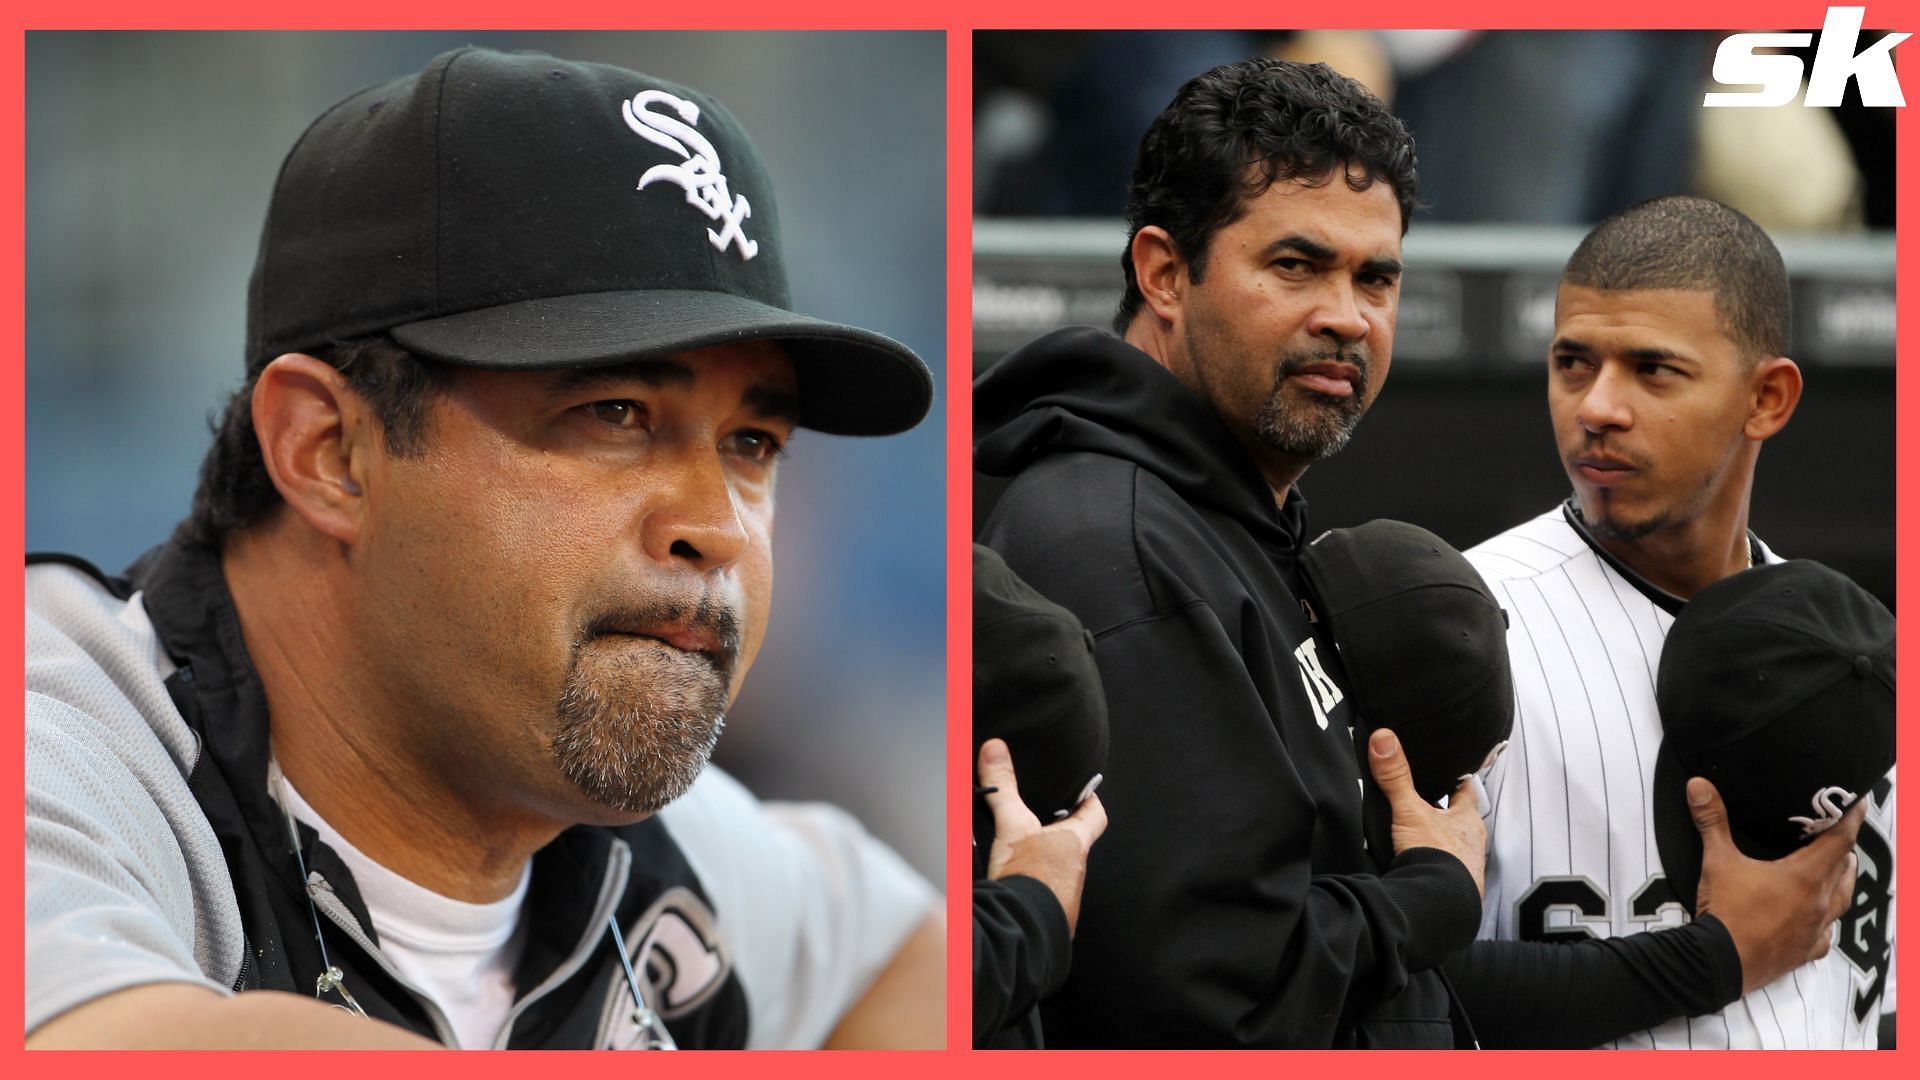 Ozzie Guillen is still managing and waiting for a call back to the